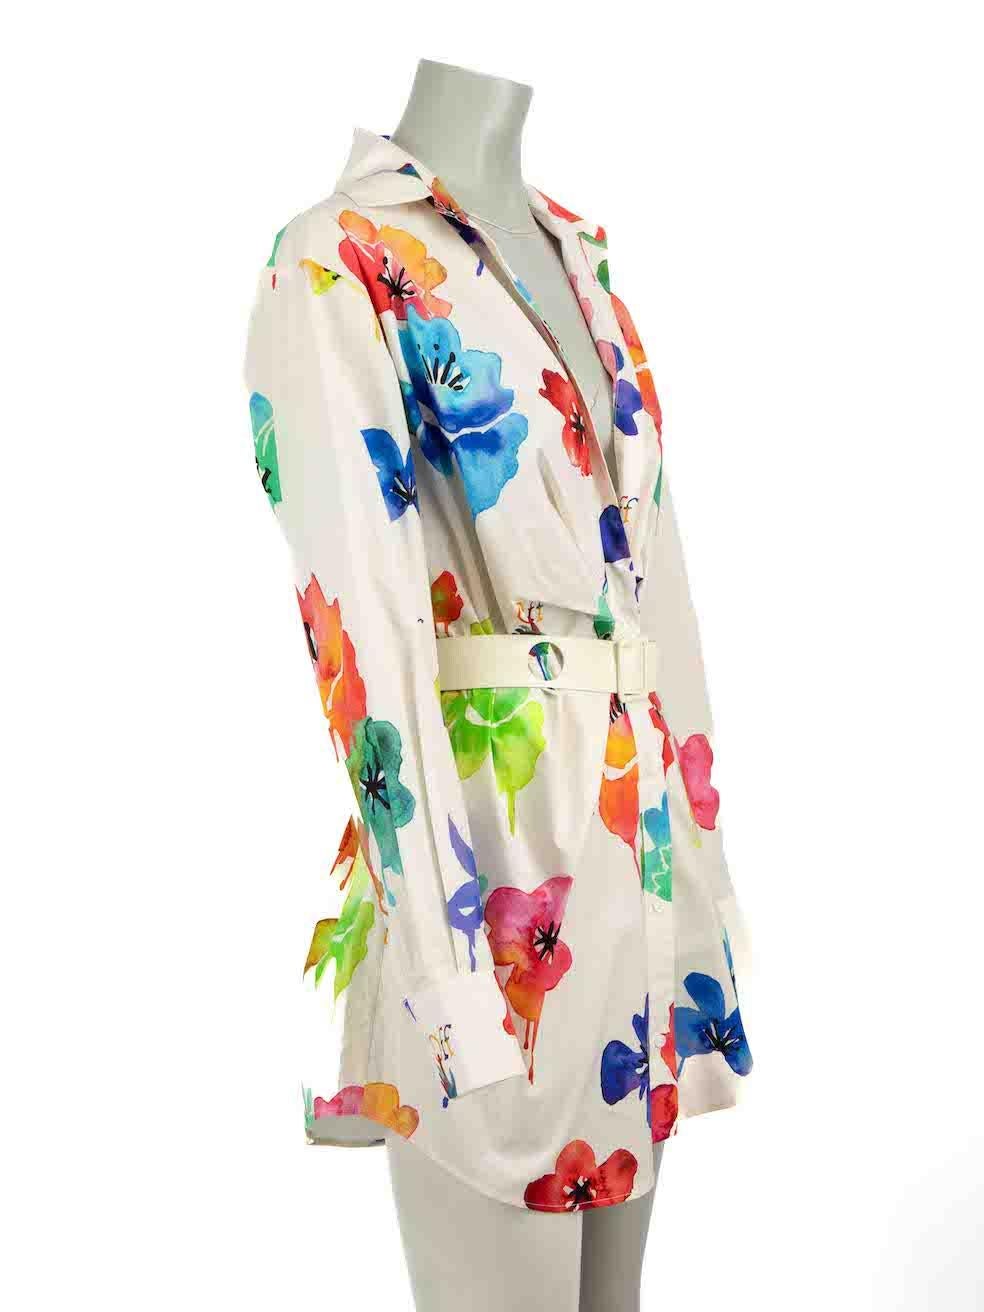 CONDITION is Very good. Minimal wear to dress is evident. Minimal wear to the edges of the belt with marks to the leather on this used Off-White designer resale item.
 
Details
2013
Multicolour
Cotton
Mini shirt dress
Graffiti floral print
V